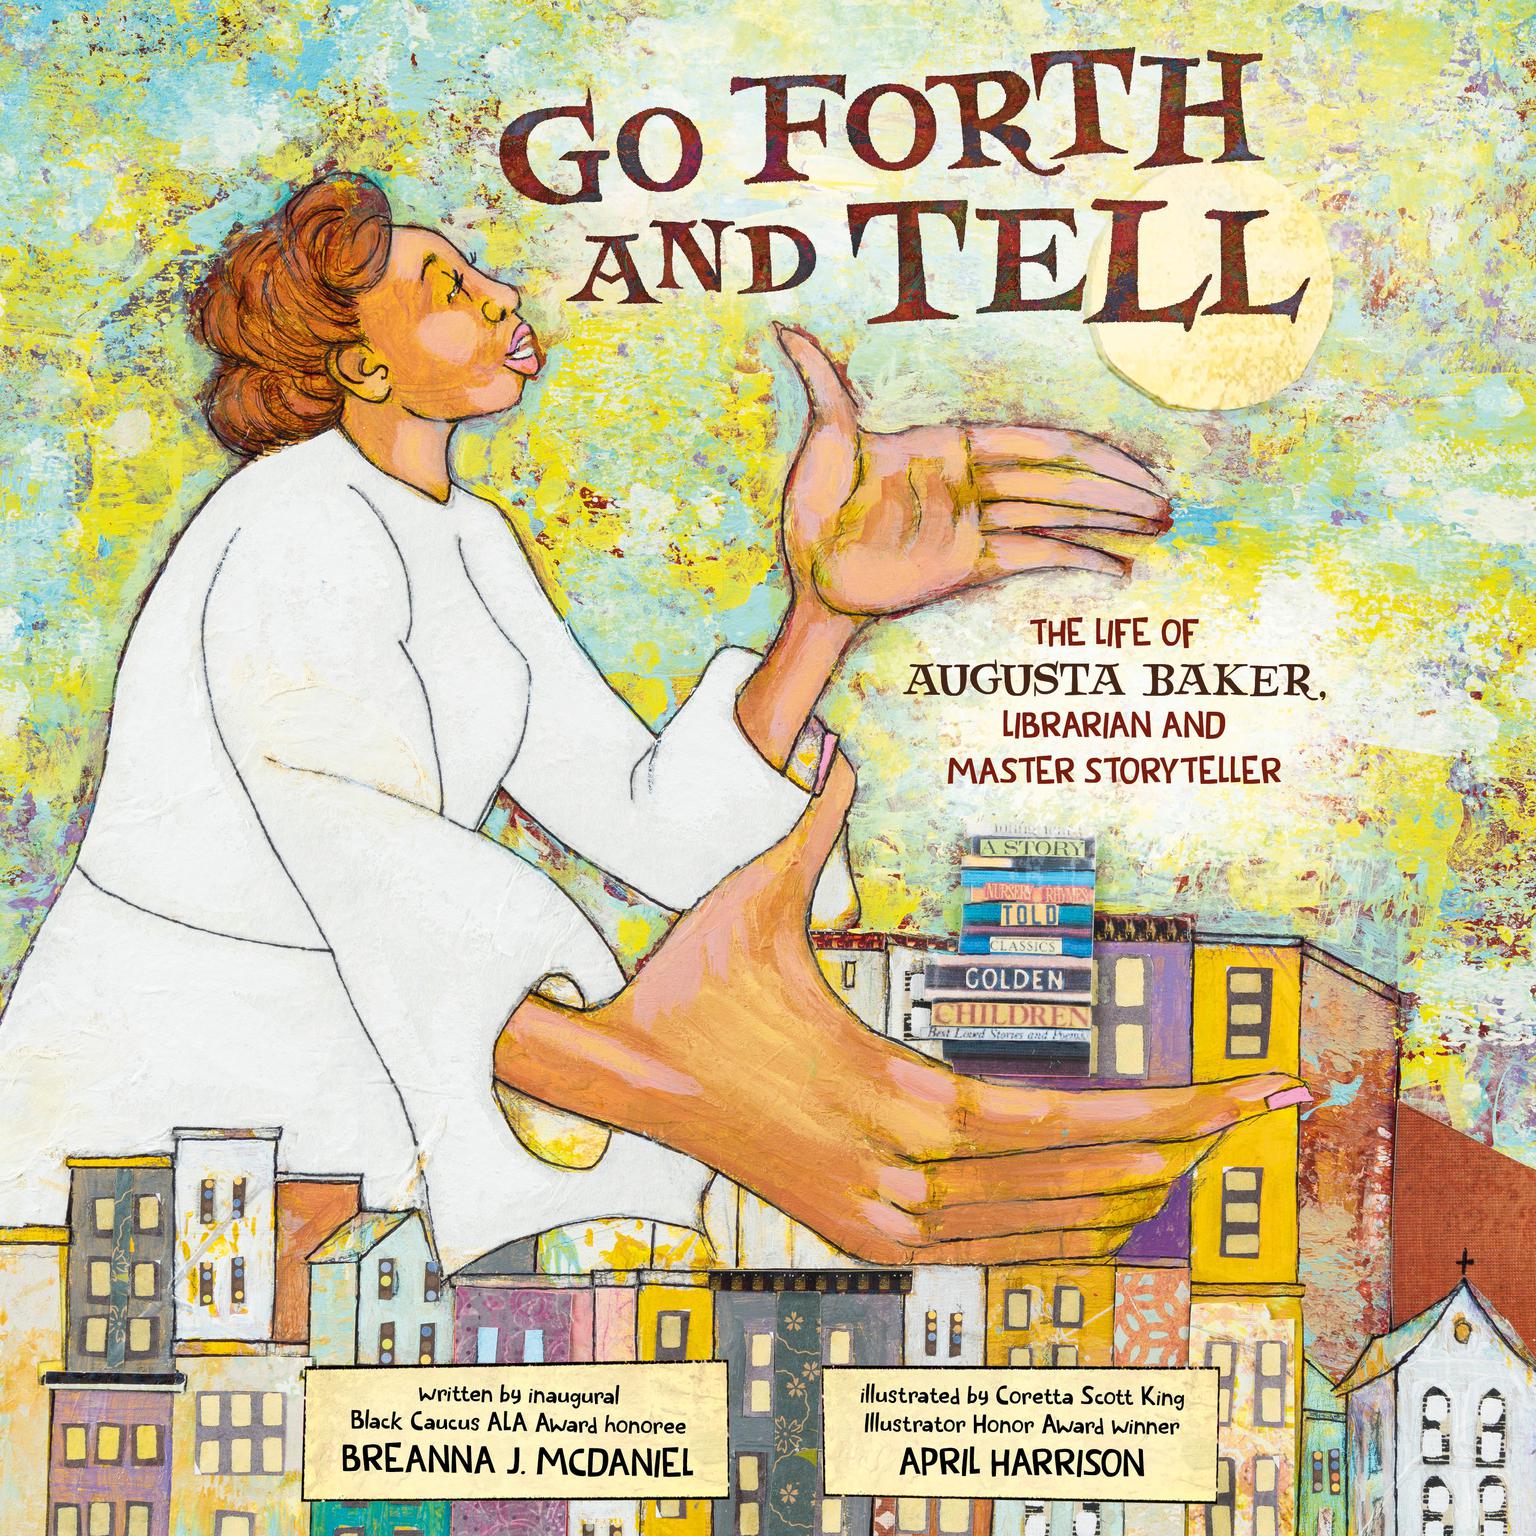 Go Forth and Tell: The Life of Augusta Baker, Librarian and Master Storyteller Audiobook, by Breanna J. McDaniel